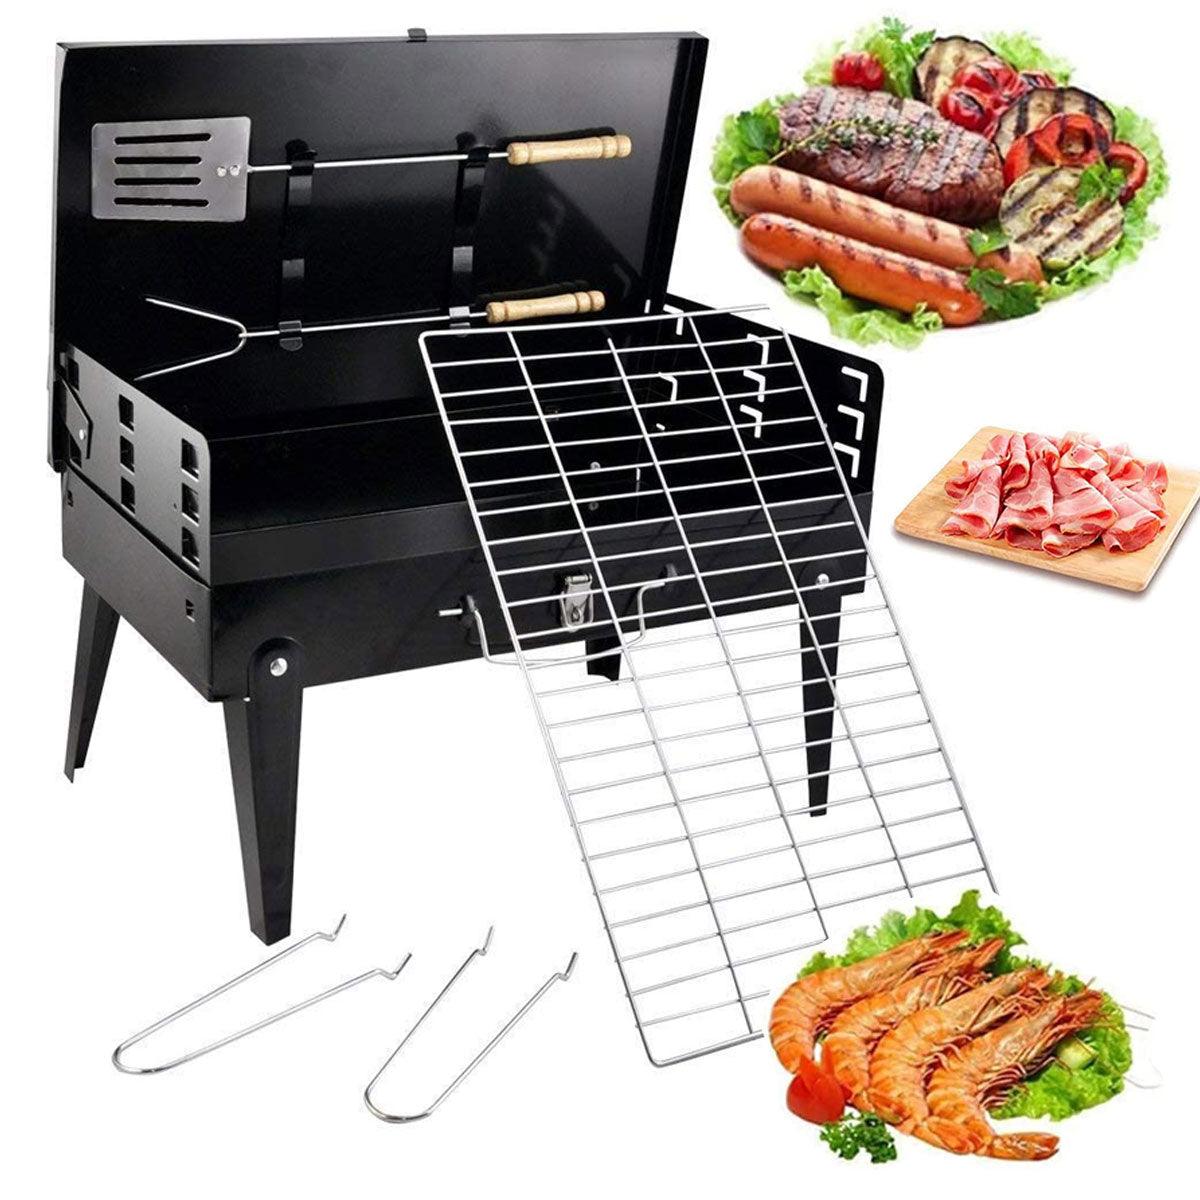 Portable Barbecue Grill Charcoal (Briefcase Style ) - TruVeli